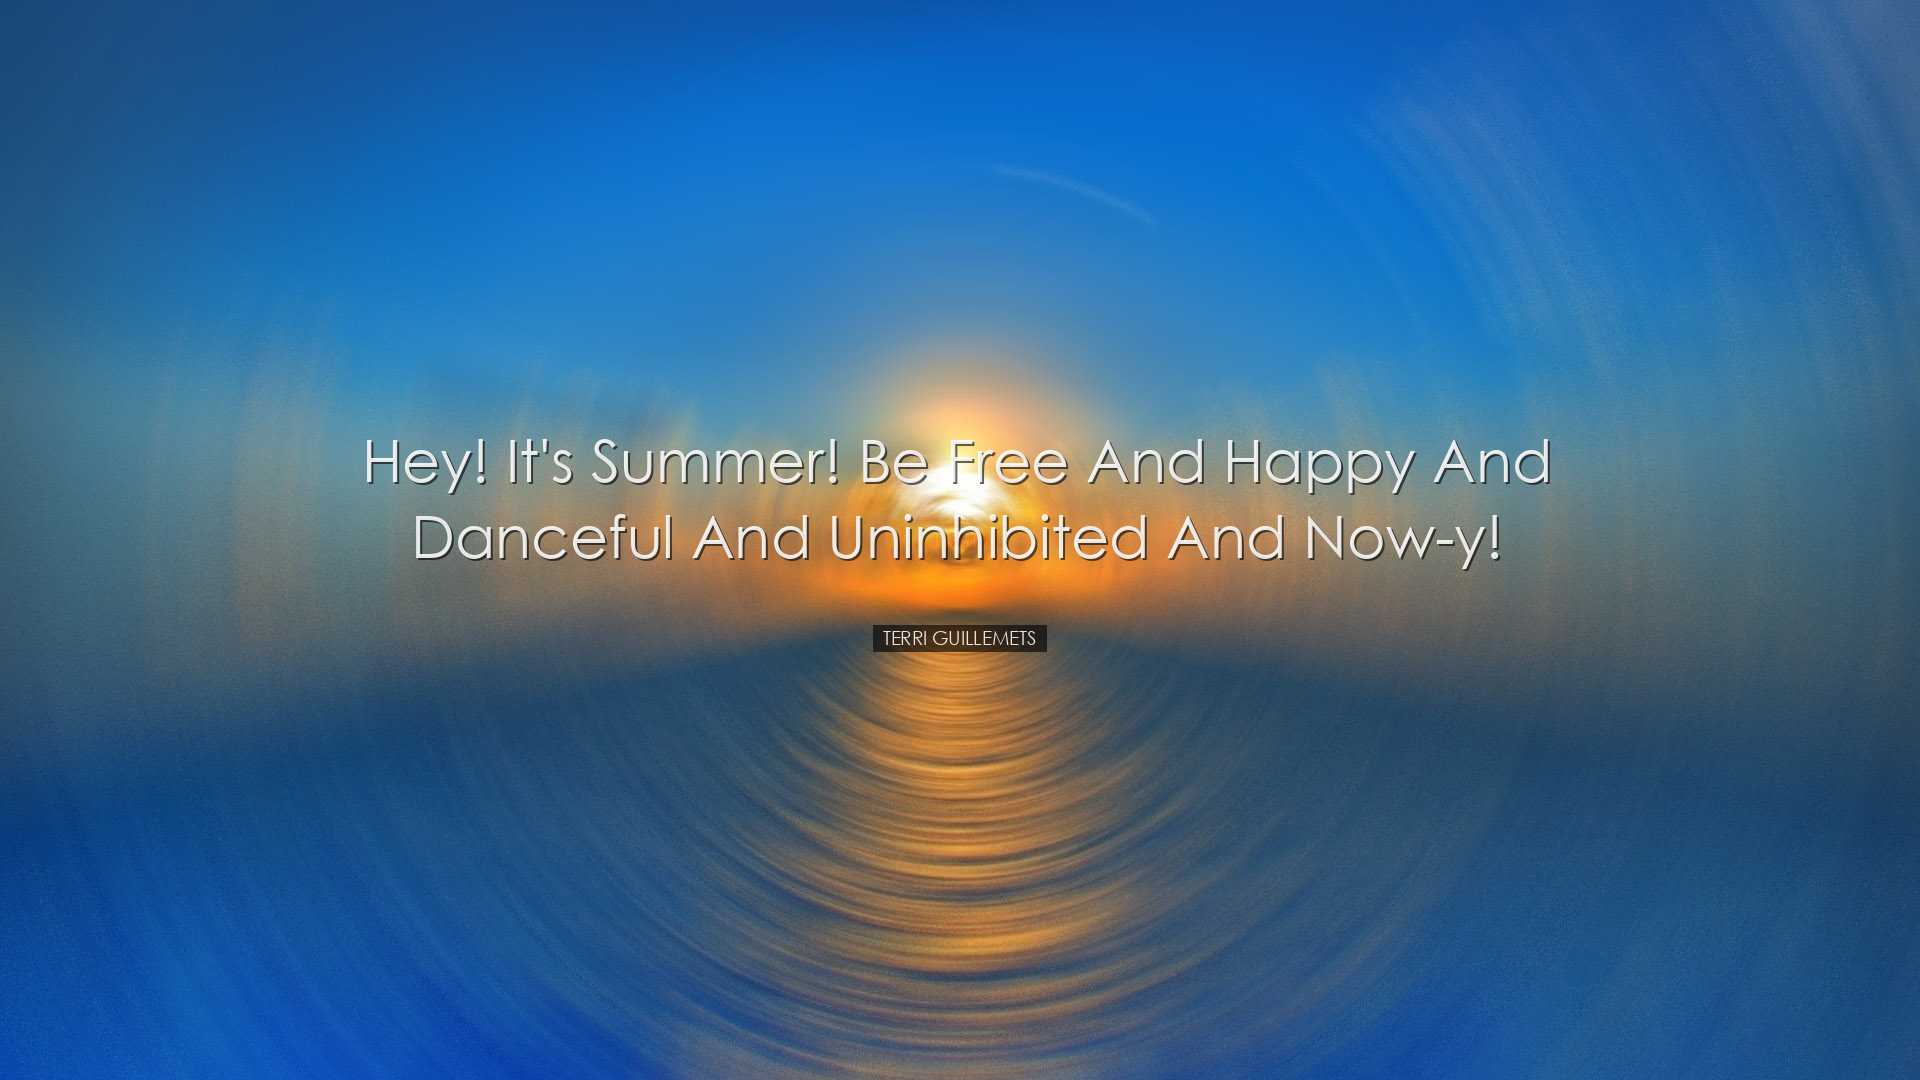 Hey! It's summer! Be free and happy and danceful and uninhibited a